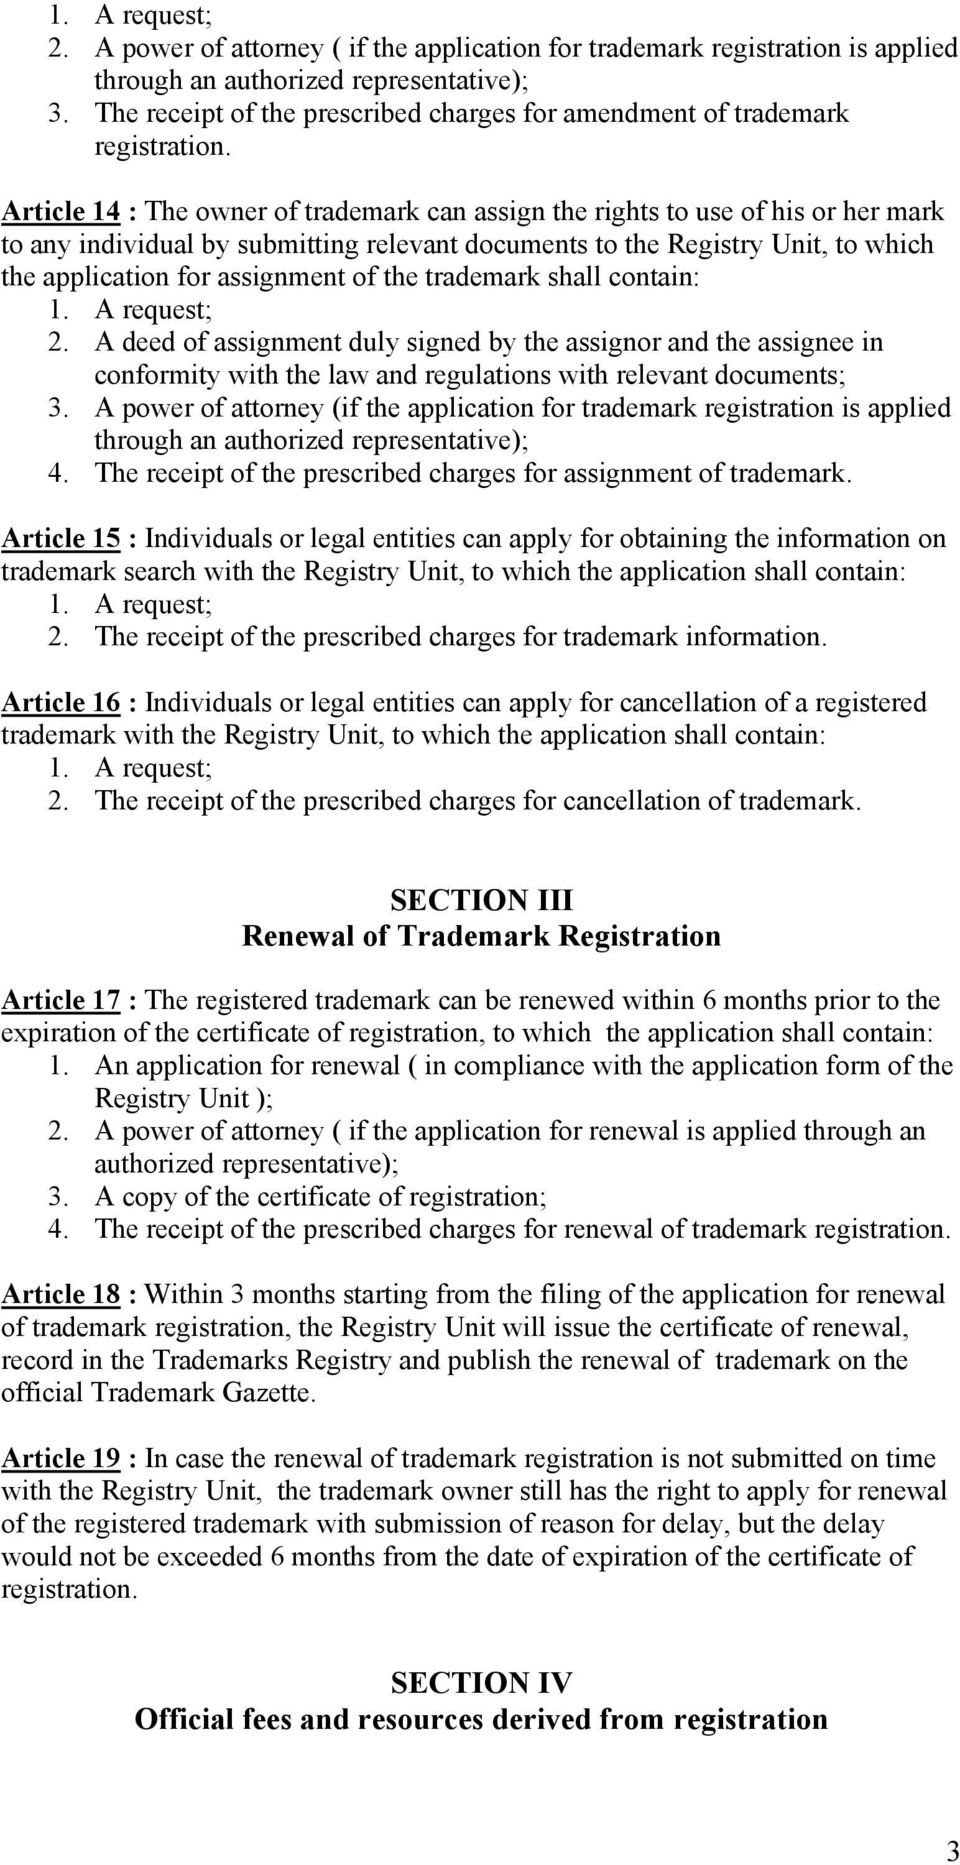 the trademark shall contain: 2. A deed of assignment duly signed by the assignor and the assignee in conformity with the law and regulations with relevant documents; 3.